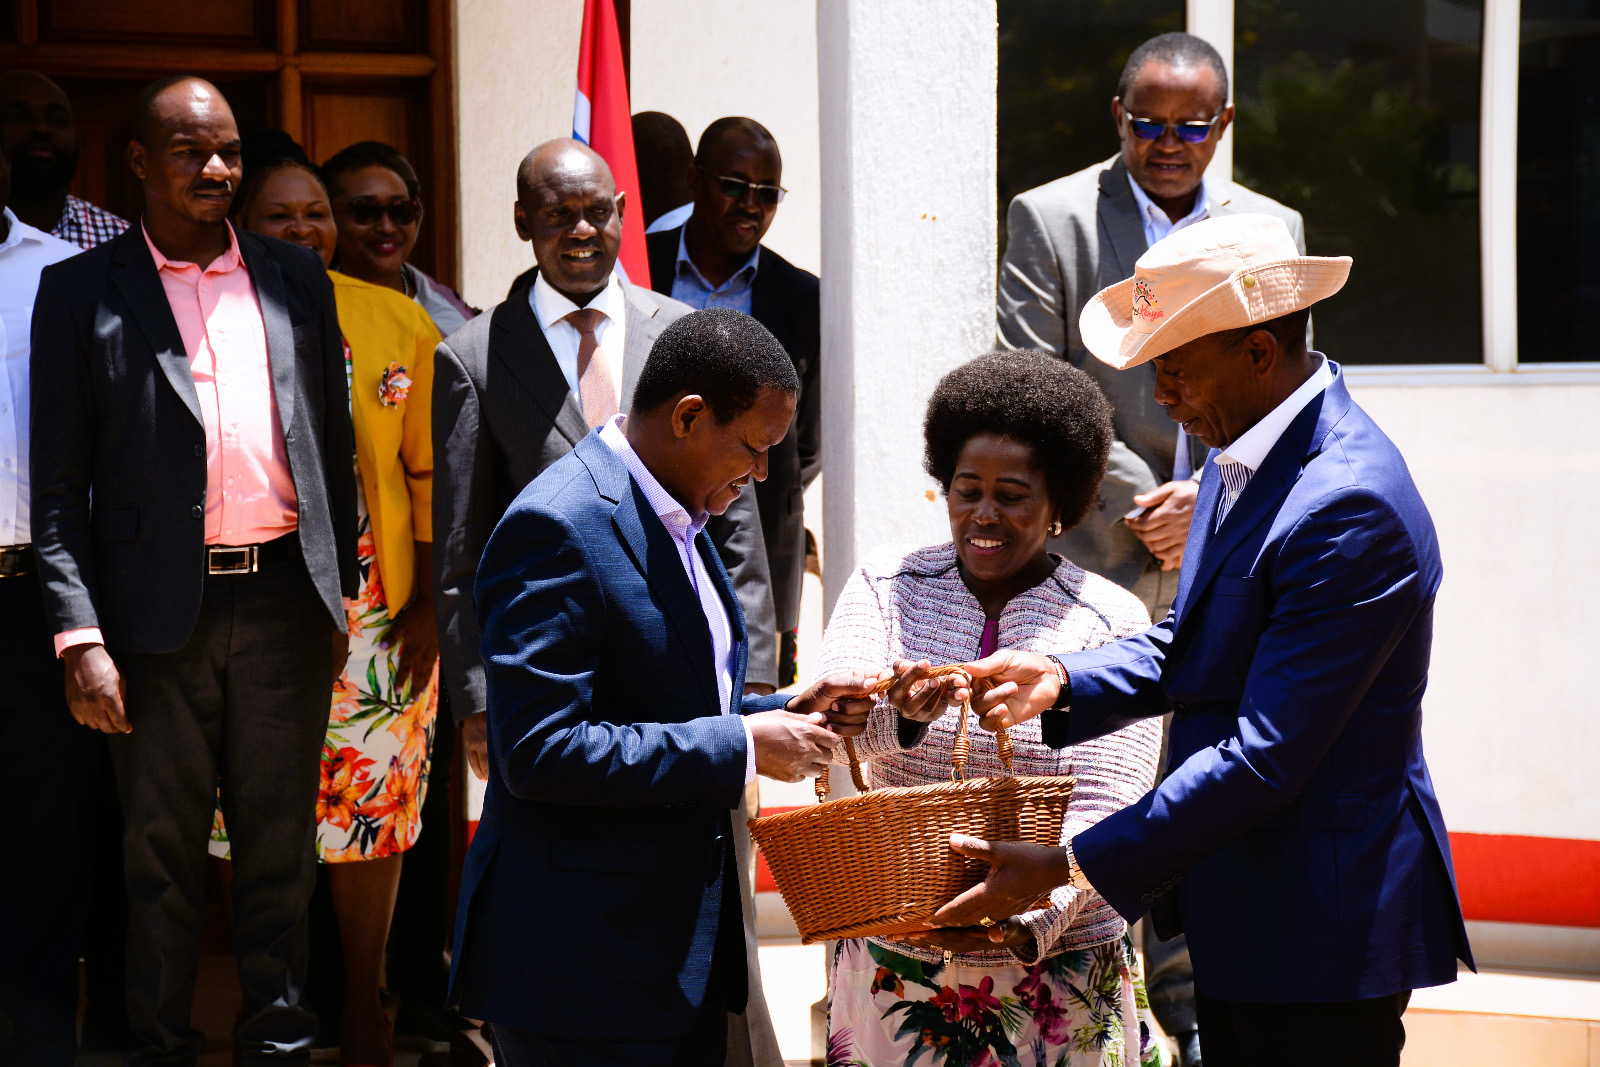 The Cabinet Secretary, Ministry of Tourism and Wildlife, Dr. Alfred Mutua (left), being gifted by the Kiambu County Governor, H.E. Dr. Paul Wamatangi (right), and the Kiambu Deputy Governor, H.E Rosemary Njeri Kirika (centre).